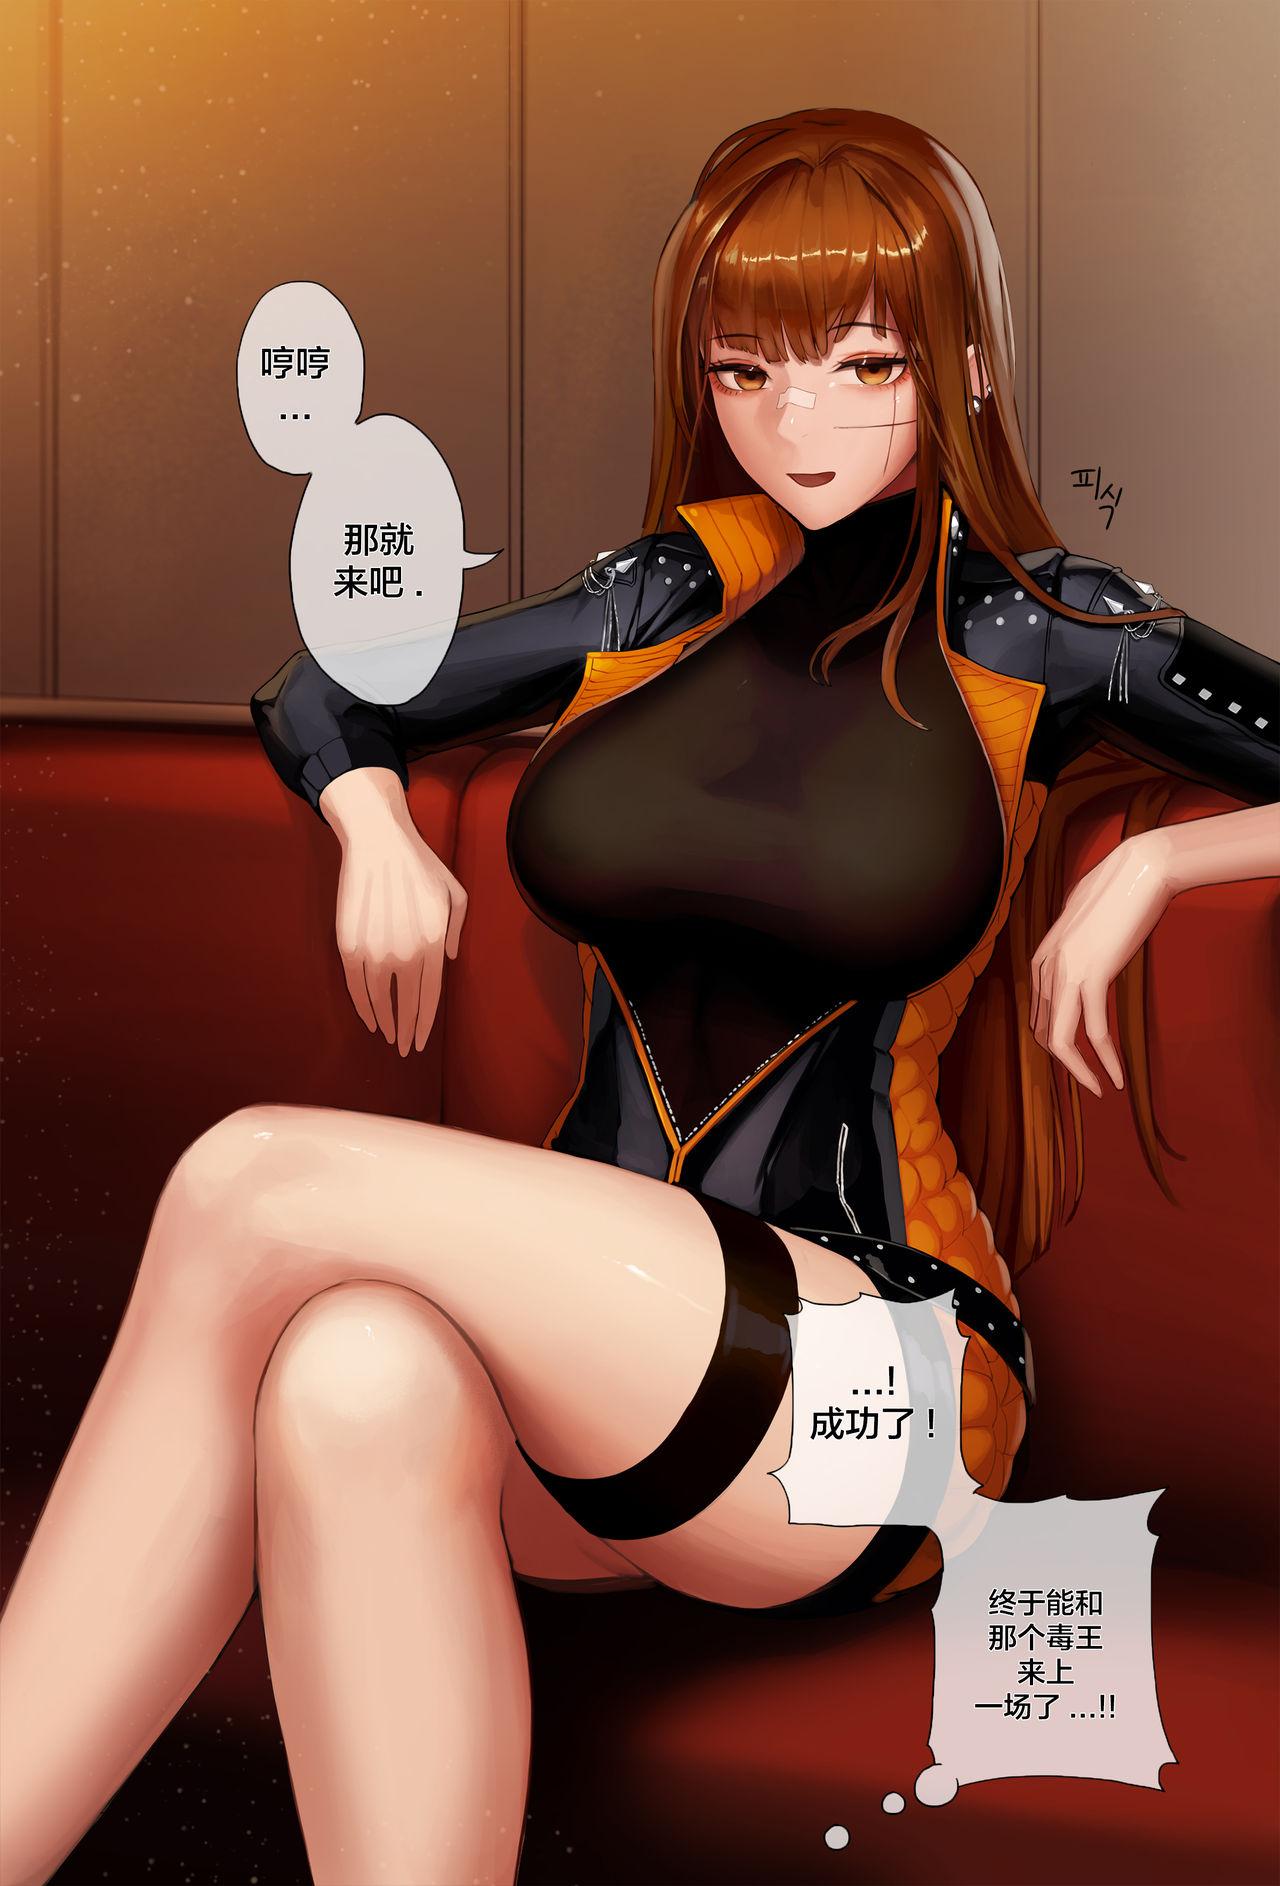 Mmf Patreon May ~ July 2020 Reward - Dungeon fighter online Free 18 Year Old Porn - Page 5